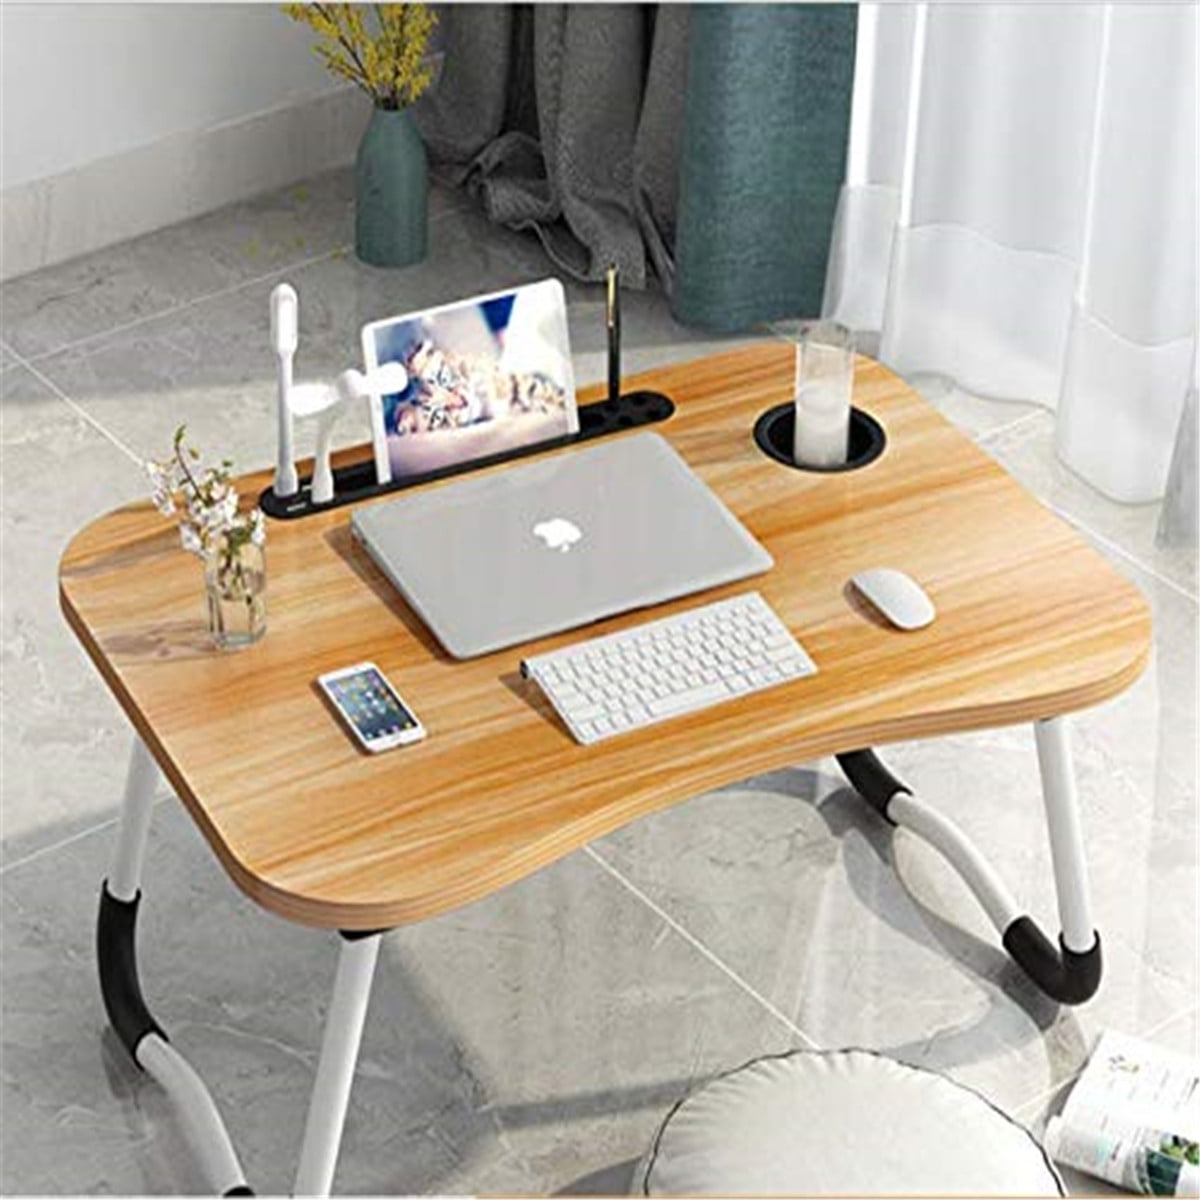 Like-very Laptop bed tray table laptop table for bed sofa height adjustable folding lepdesks laptop stand bed table breakfast table laptop stand nursing table laptop table couch laptop tray stand 